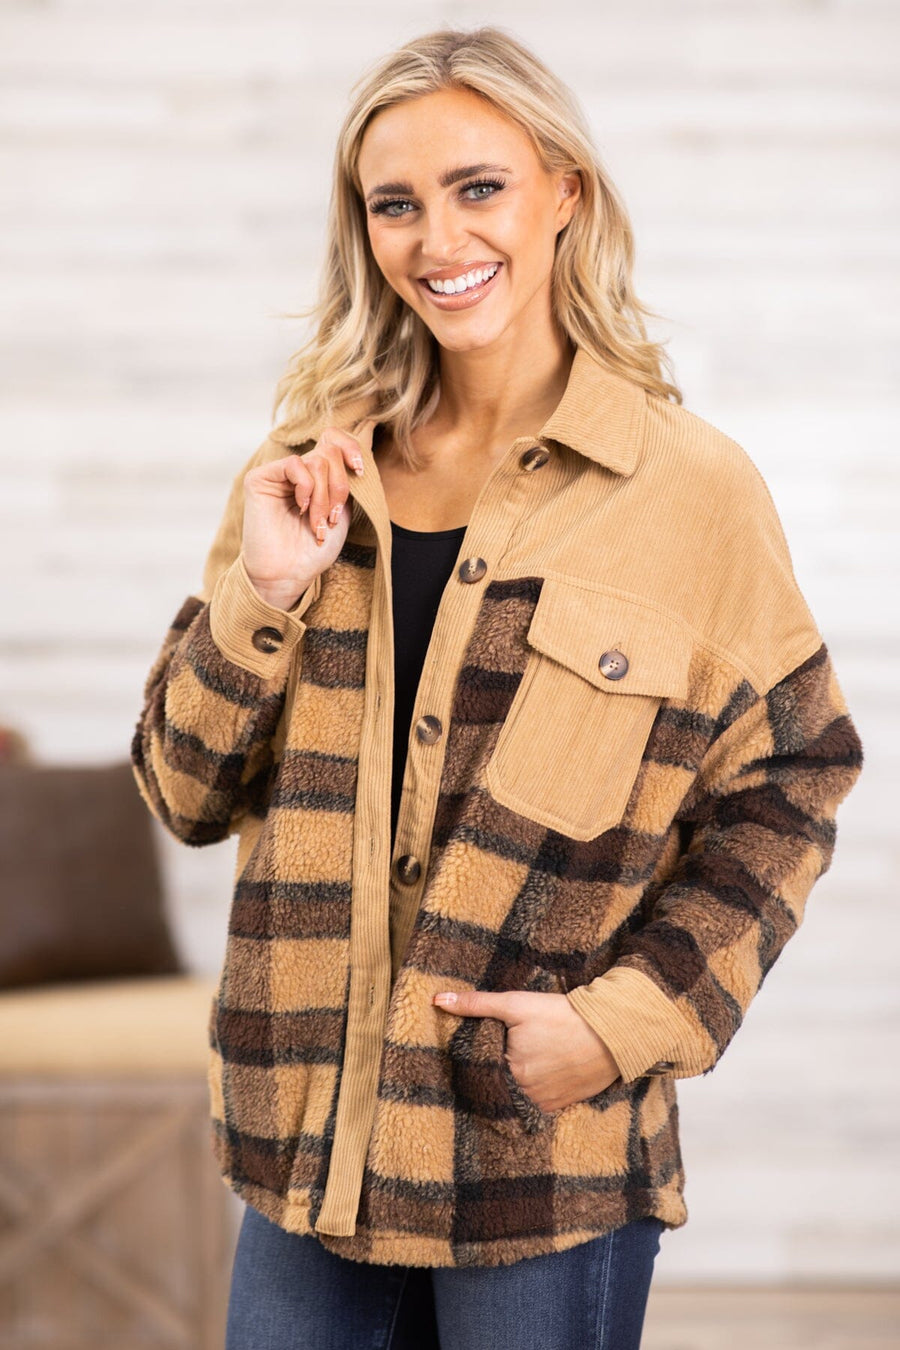 Tan Multicolor Plaid and Corduroy Shacket - Filly Flair